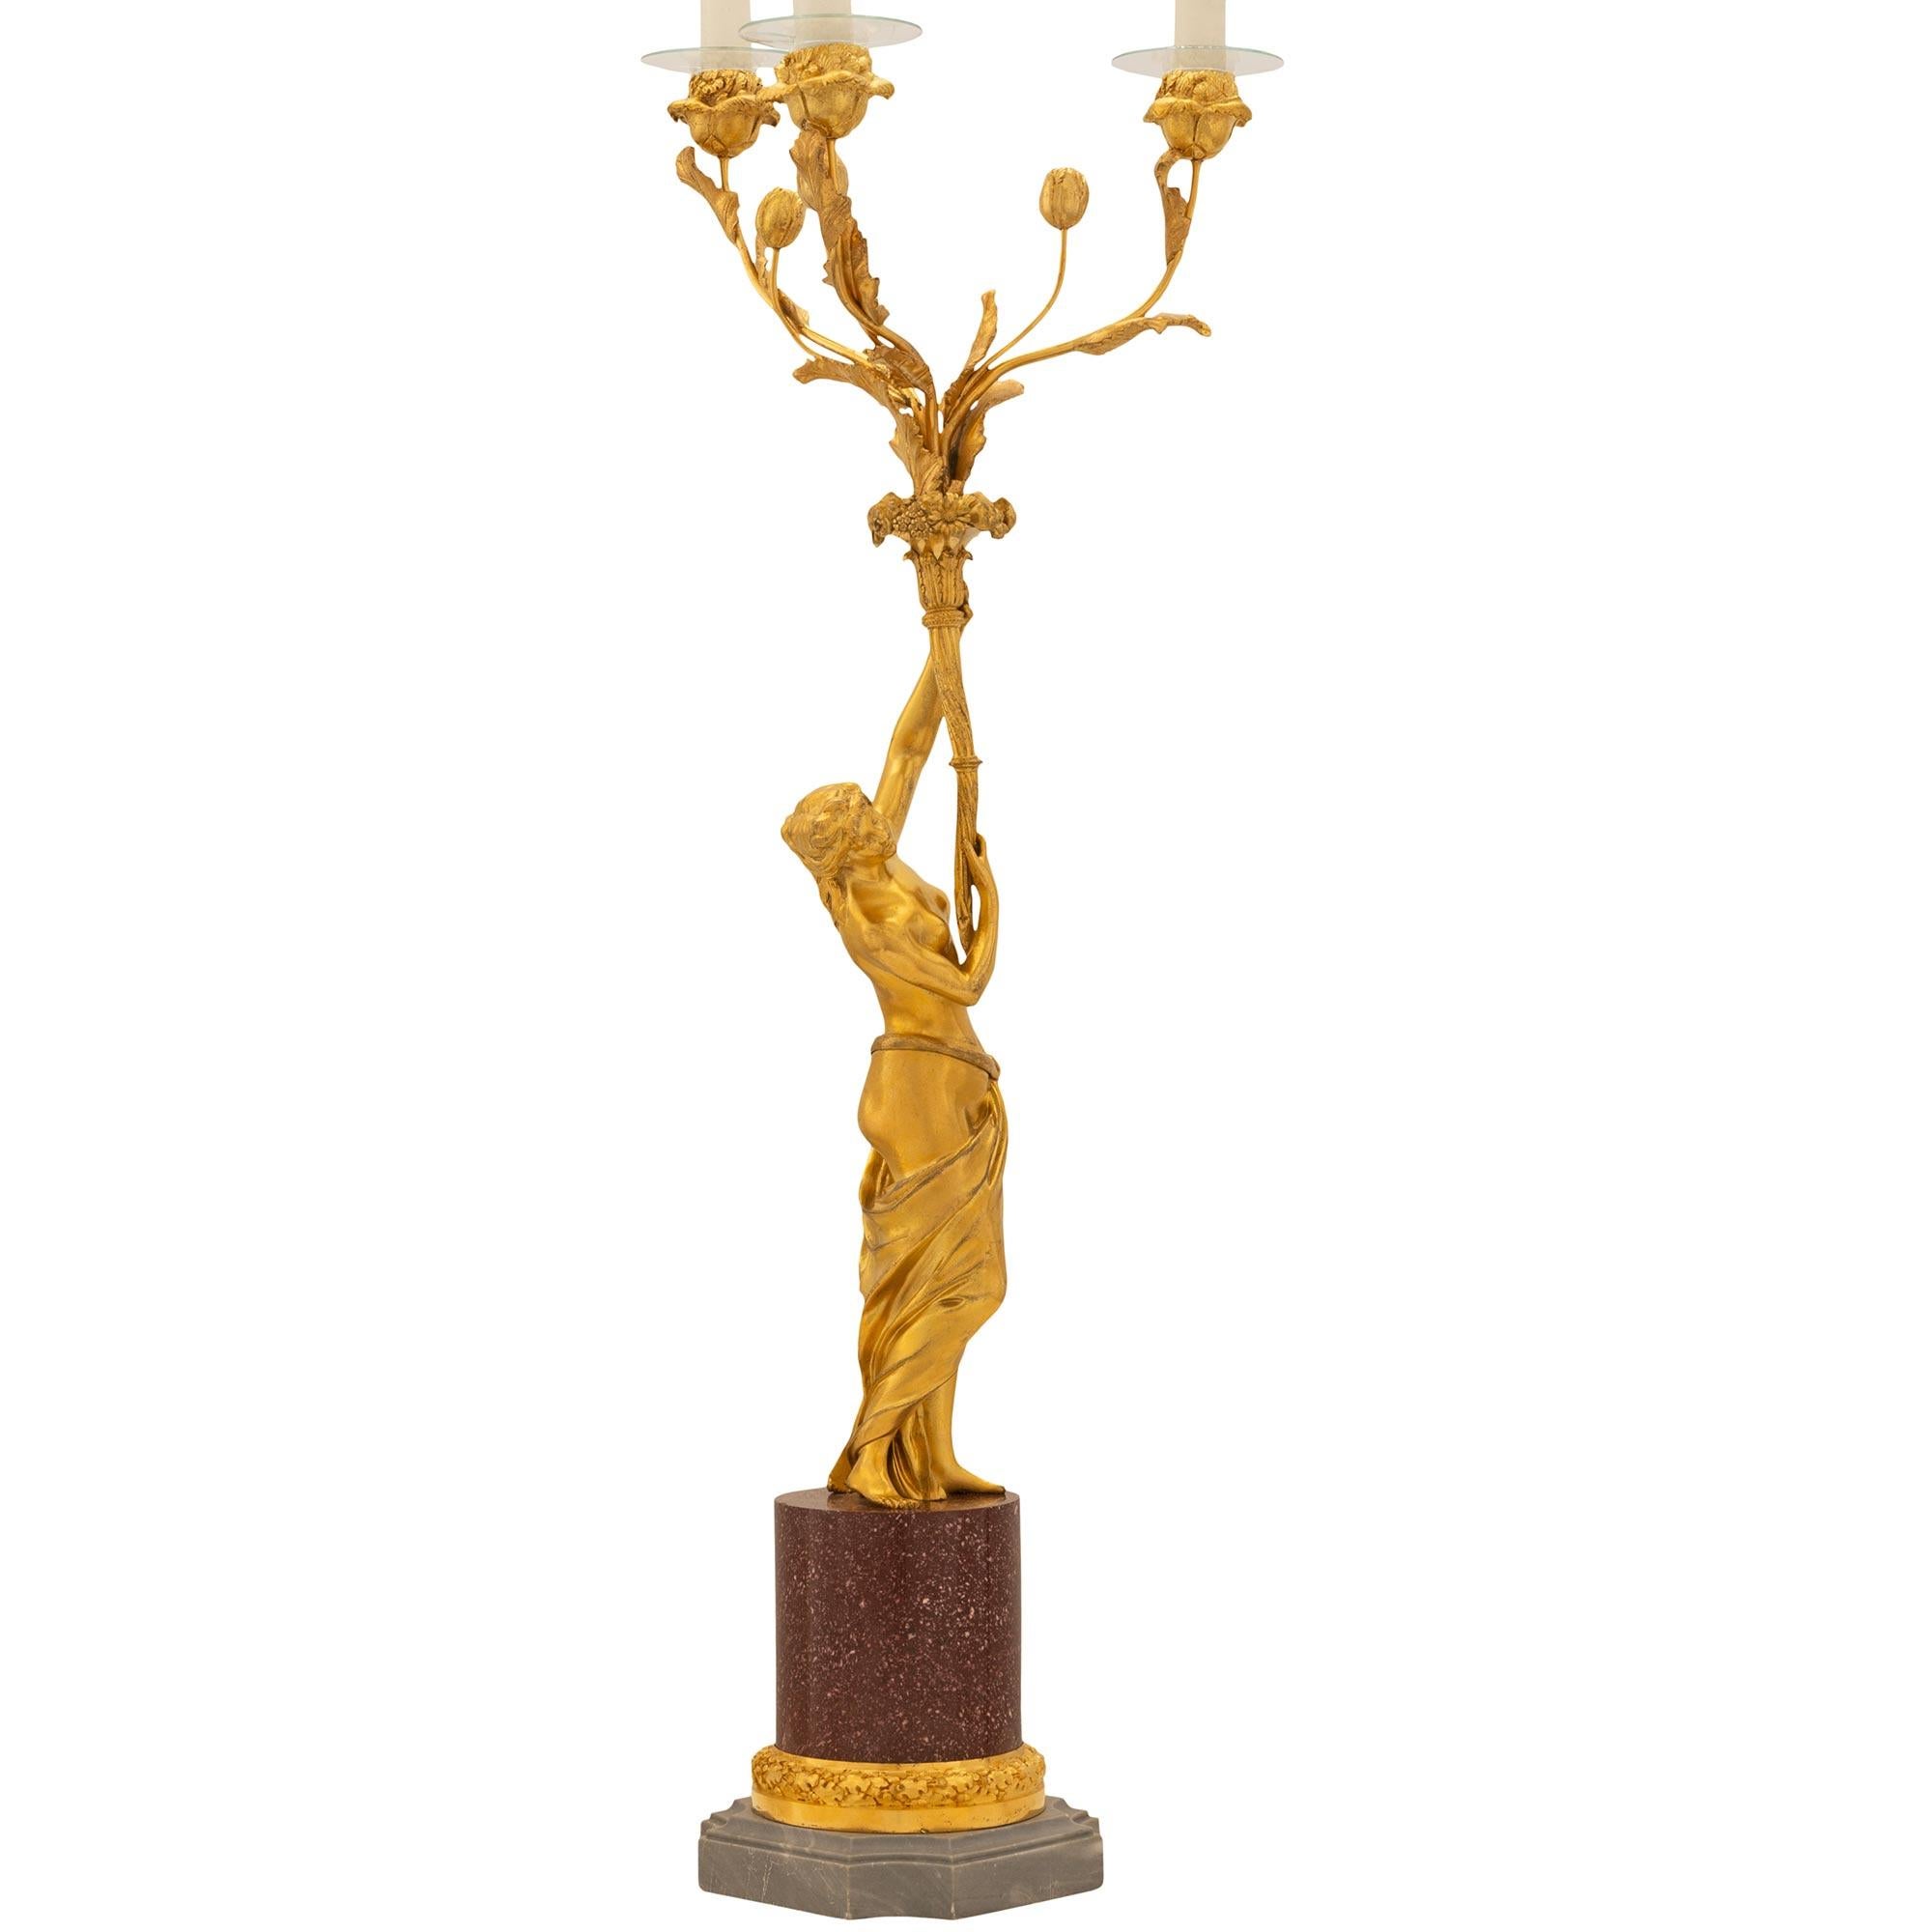 A stunning and extremely high quality true pair of French 19th century Louis XVI st. ormolu, Bleu Turquin marble, and Porphyry candelabras. Each candelabra is raised by a square Bleu Turquin marble base with concave corners and an elegant and most